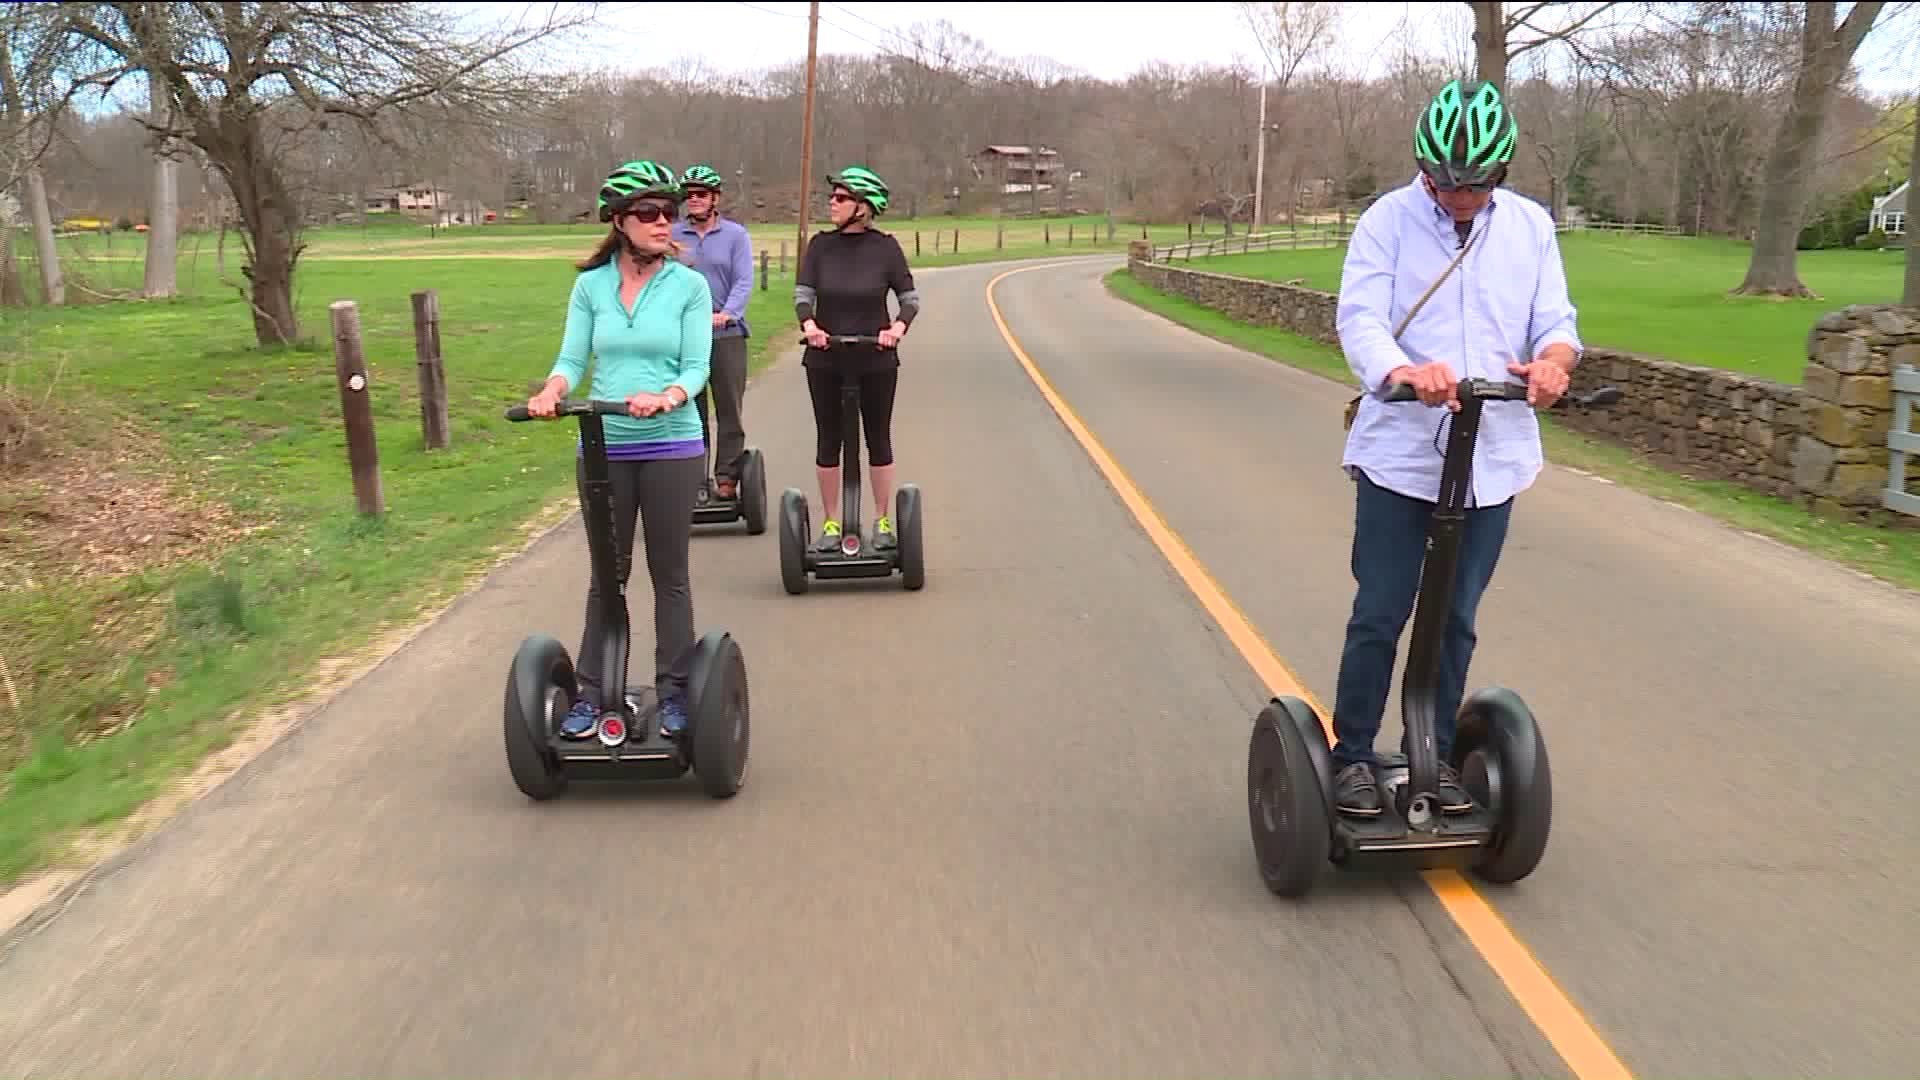 History meets technology during a Shoreline Segway tour of Guilford